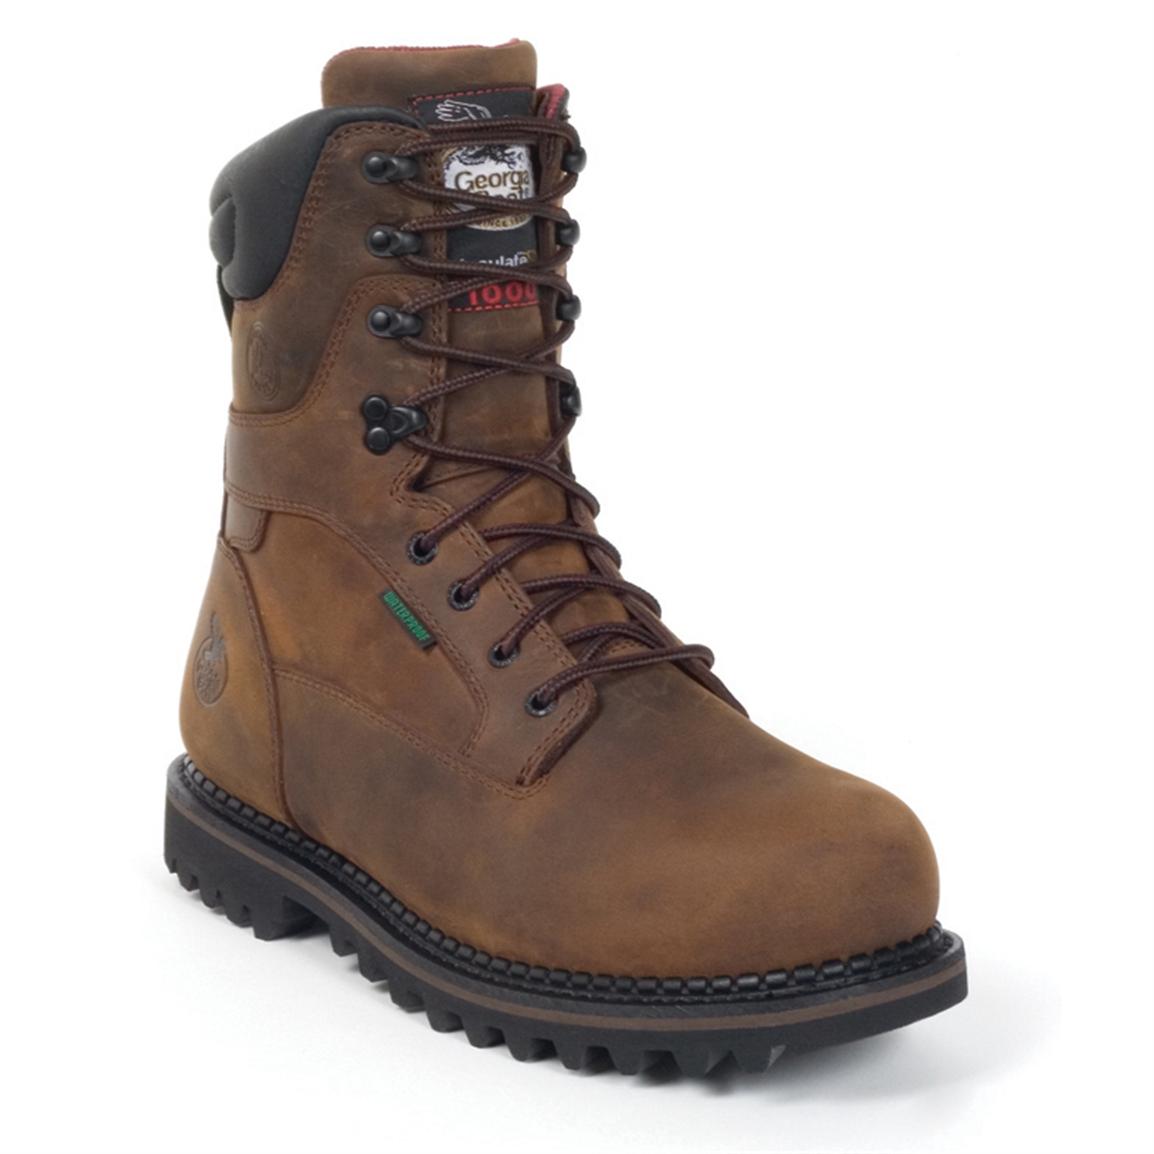 1000 gram insulated work boots composite toe